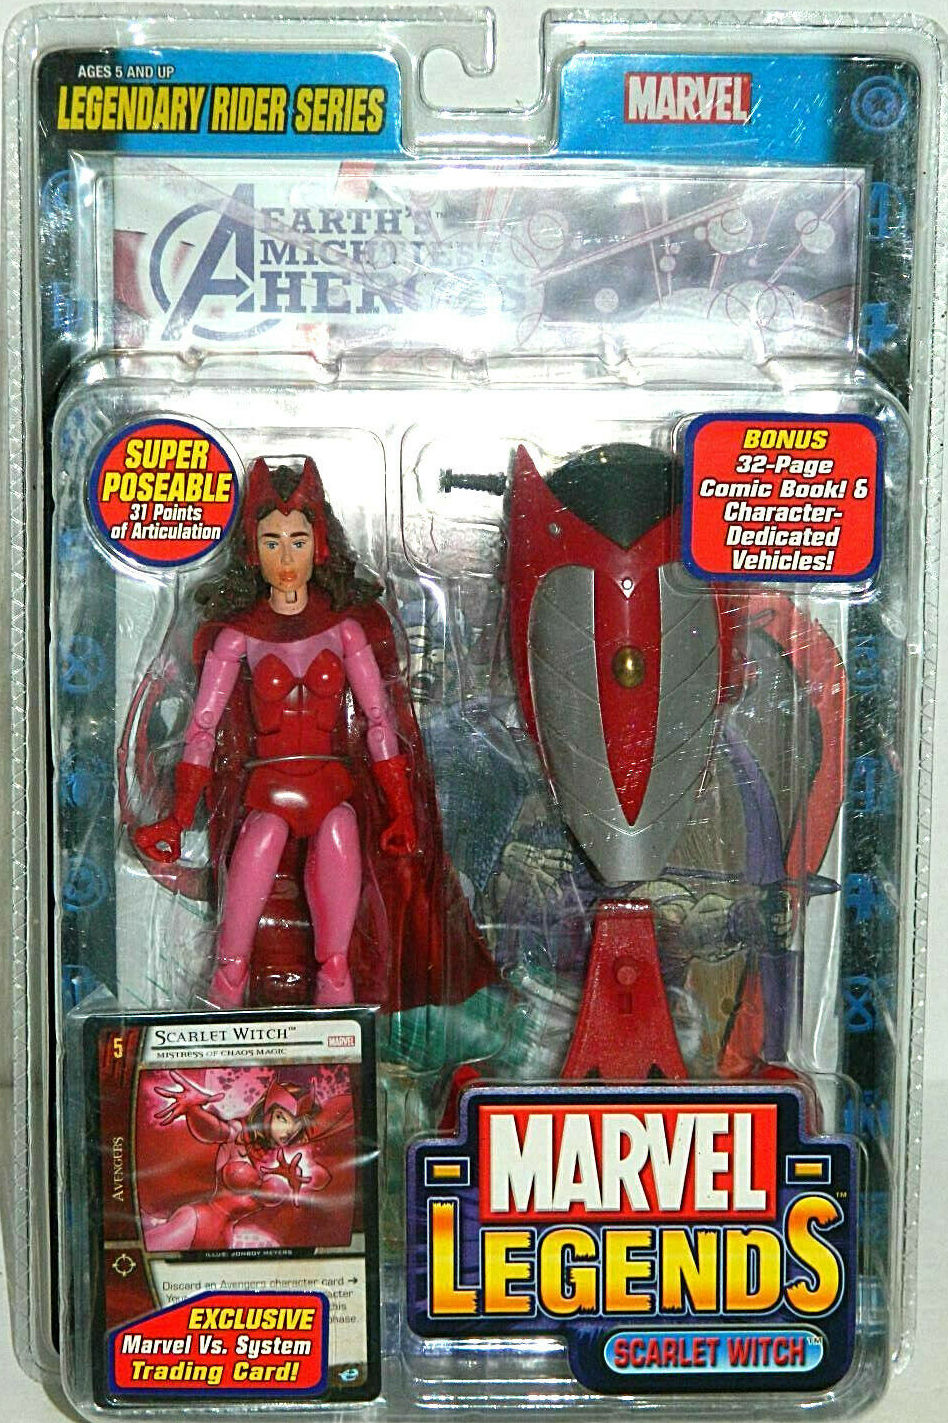 Marvel Legends Series 11 [Legendary Riders] - Scarlet Witch